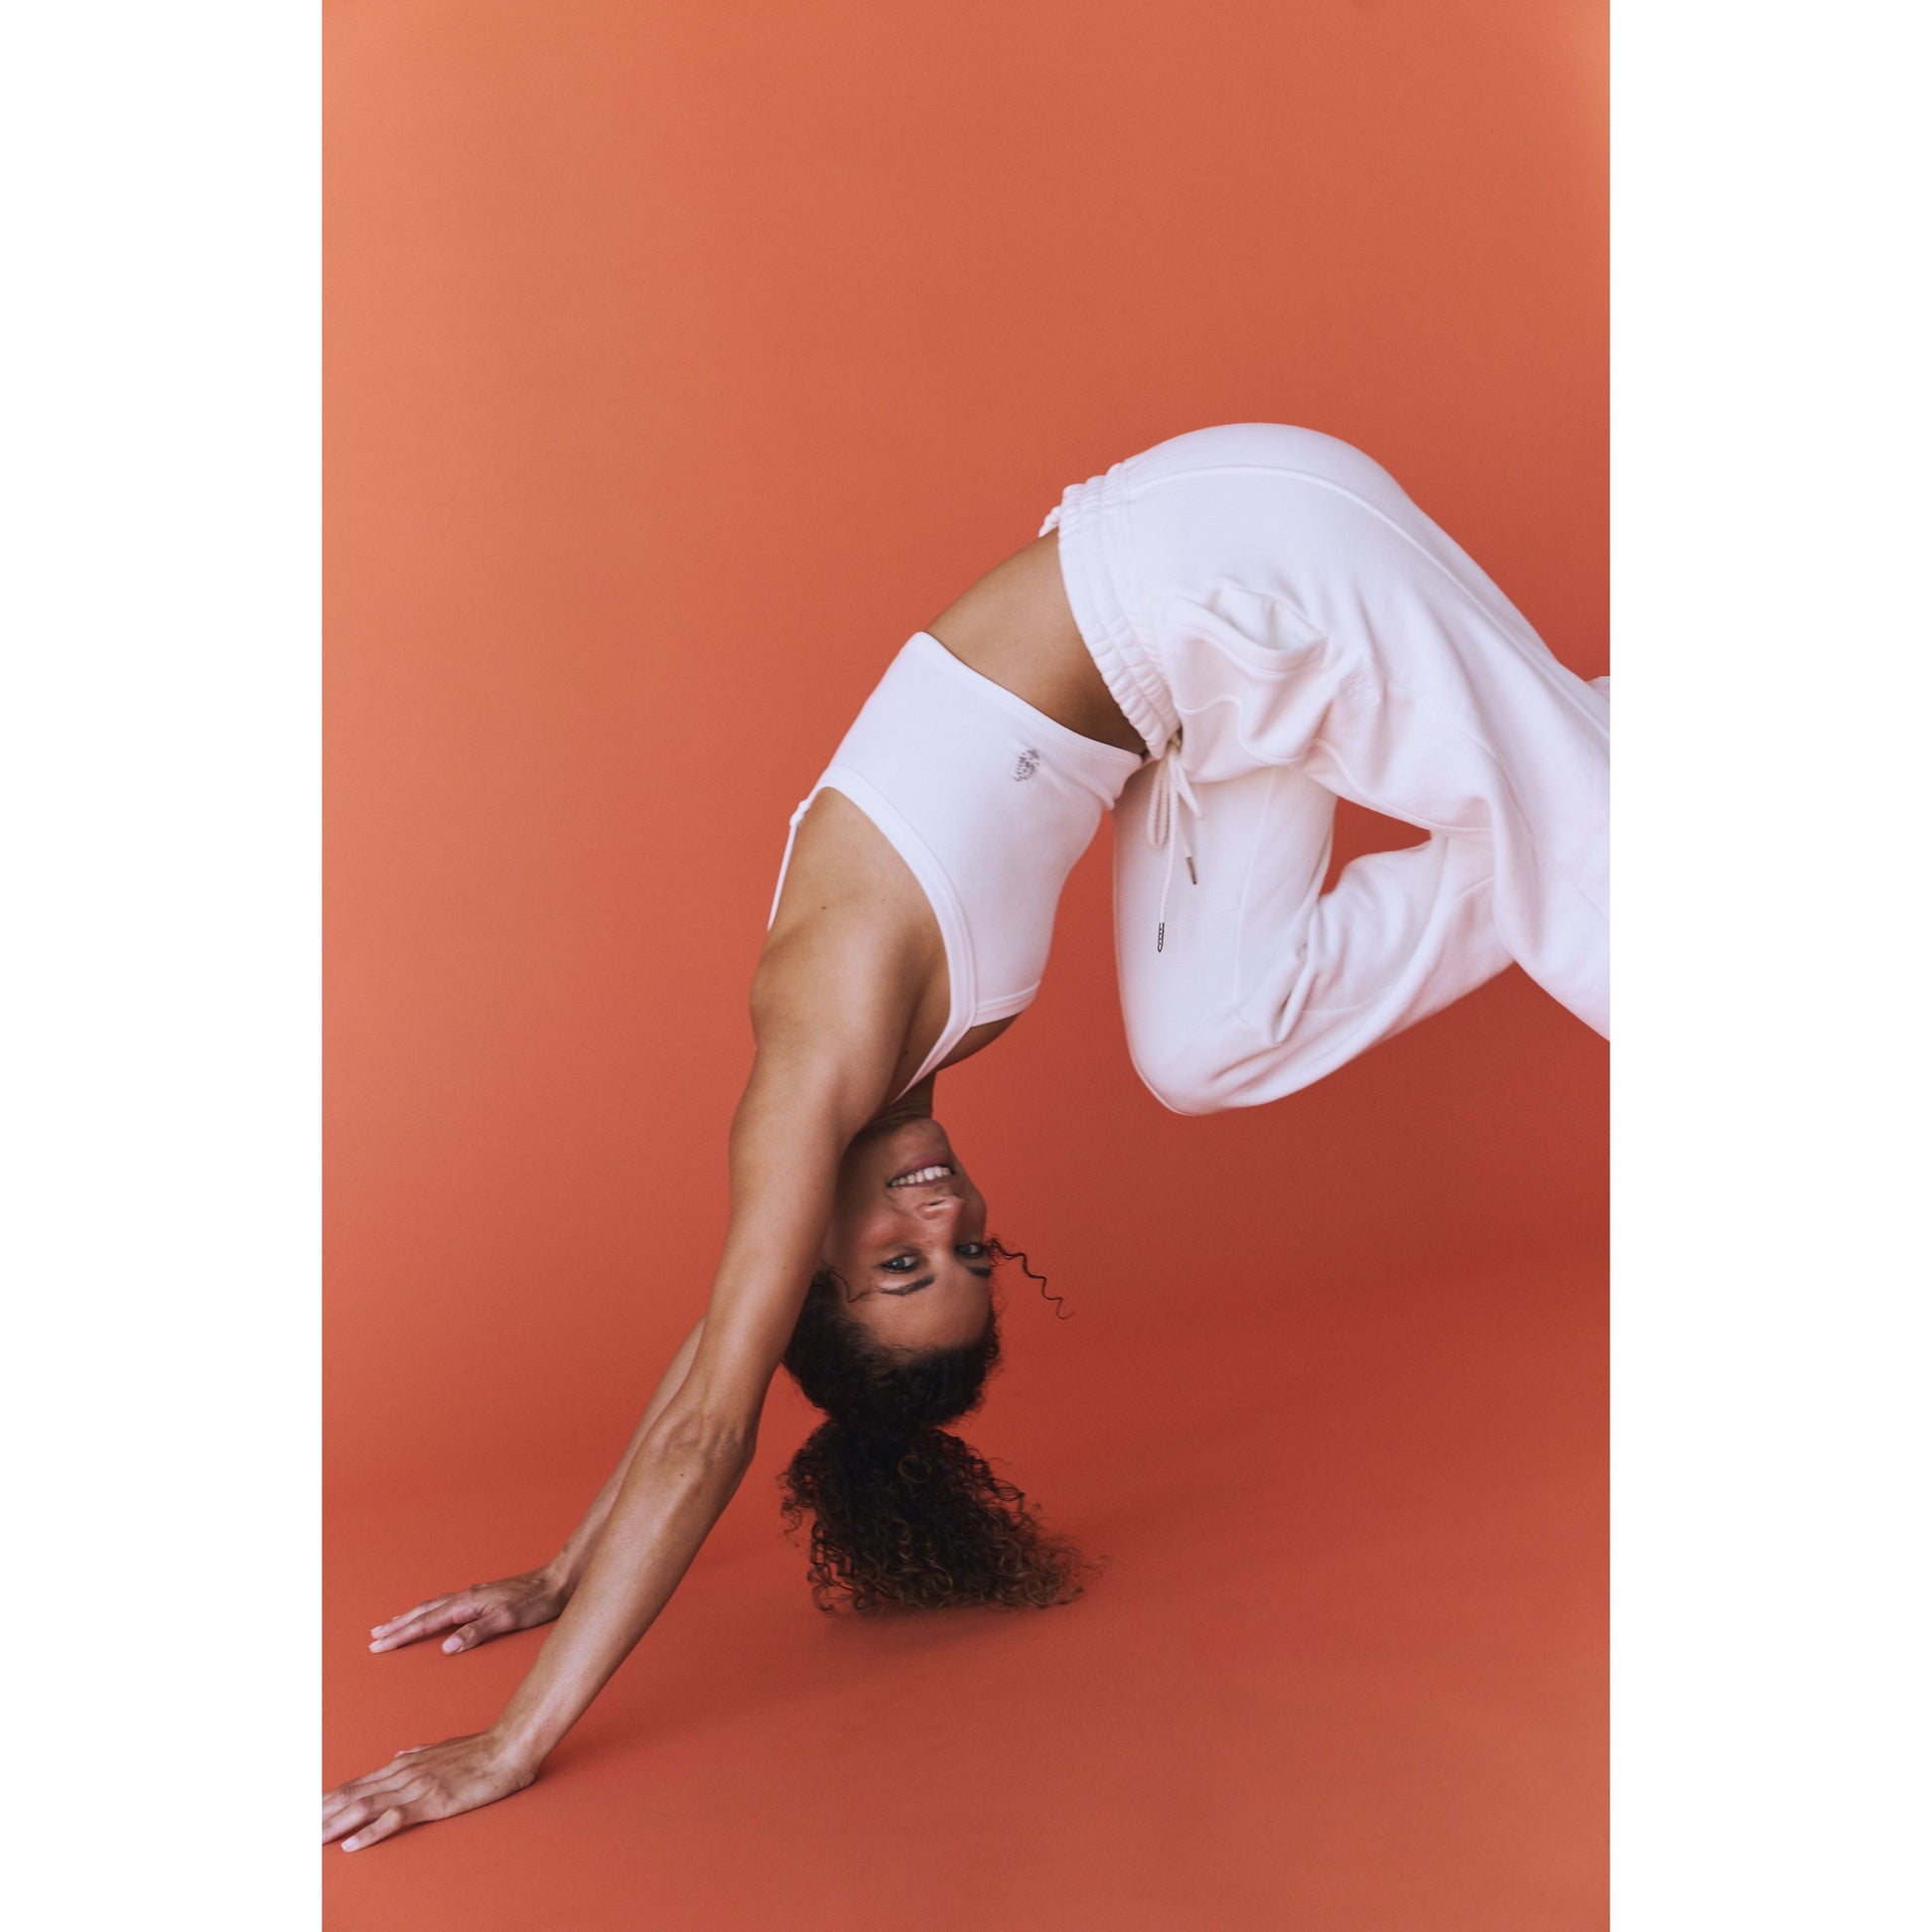 A woman performs a backbend in a Free People Movement All Clear Cami Solid, White outfit against an orange background, smiling at the camera.